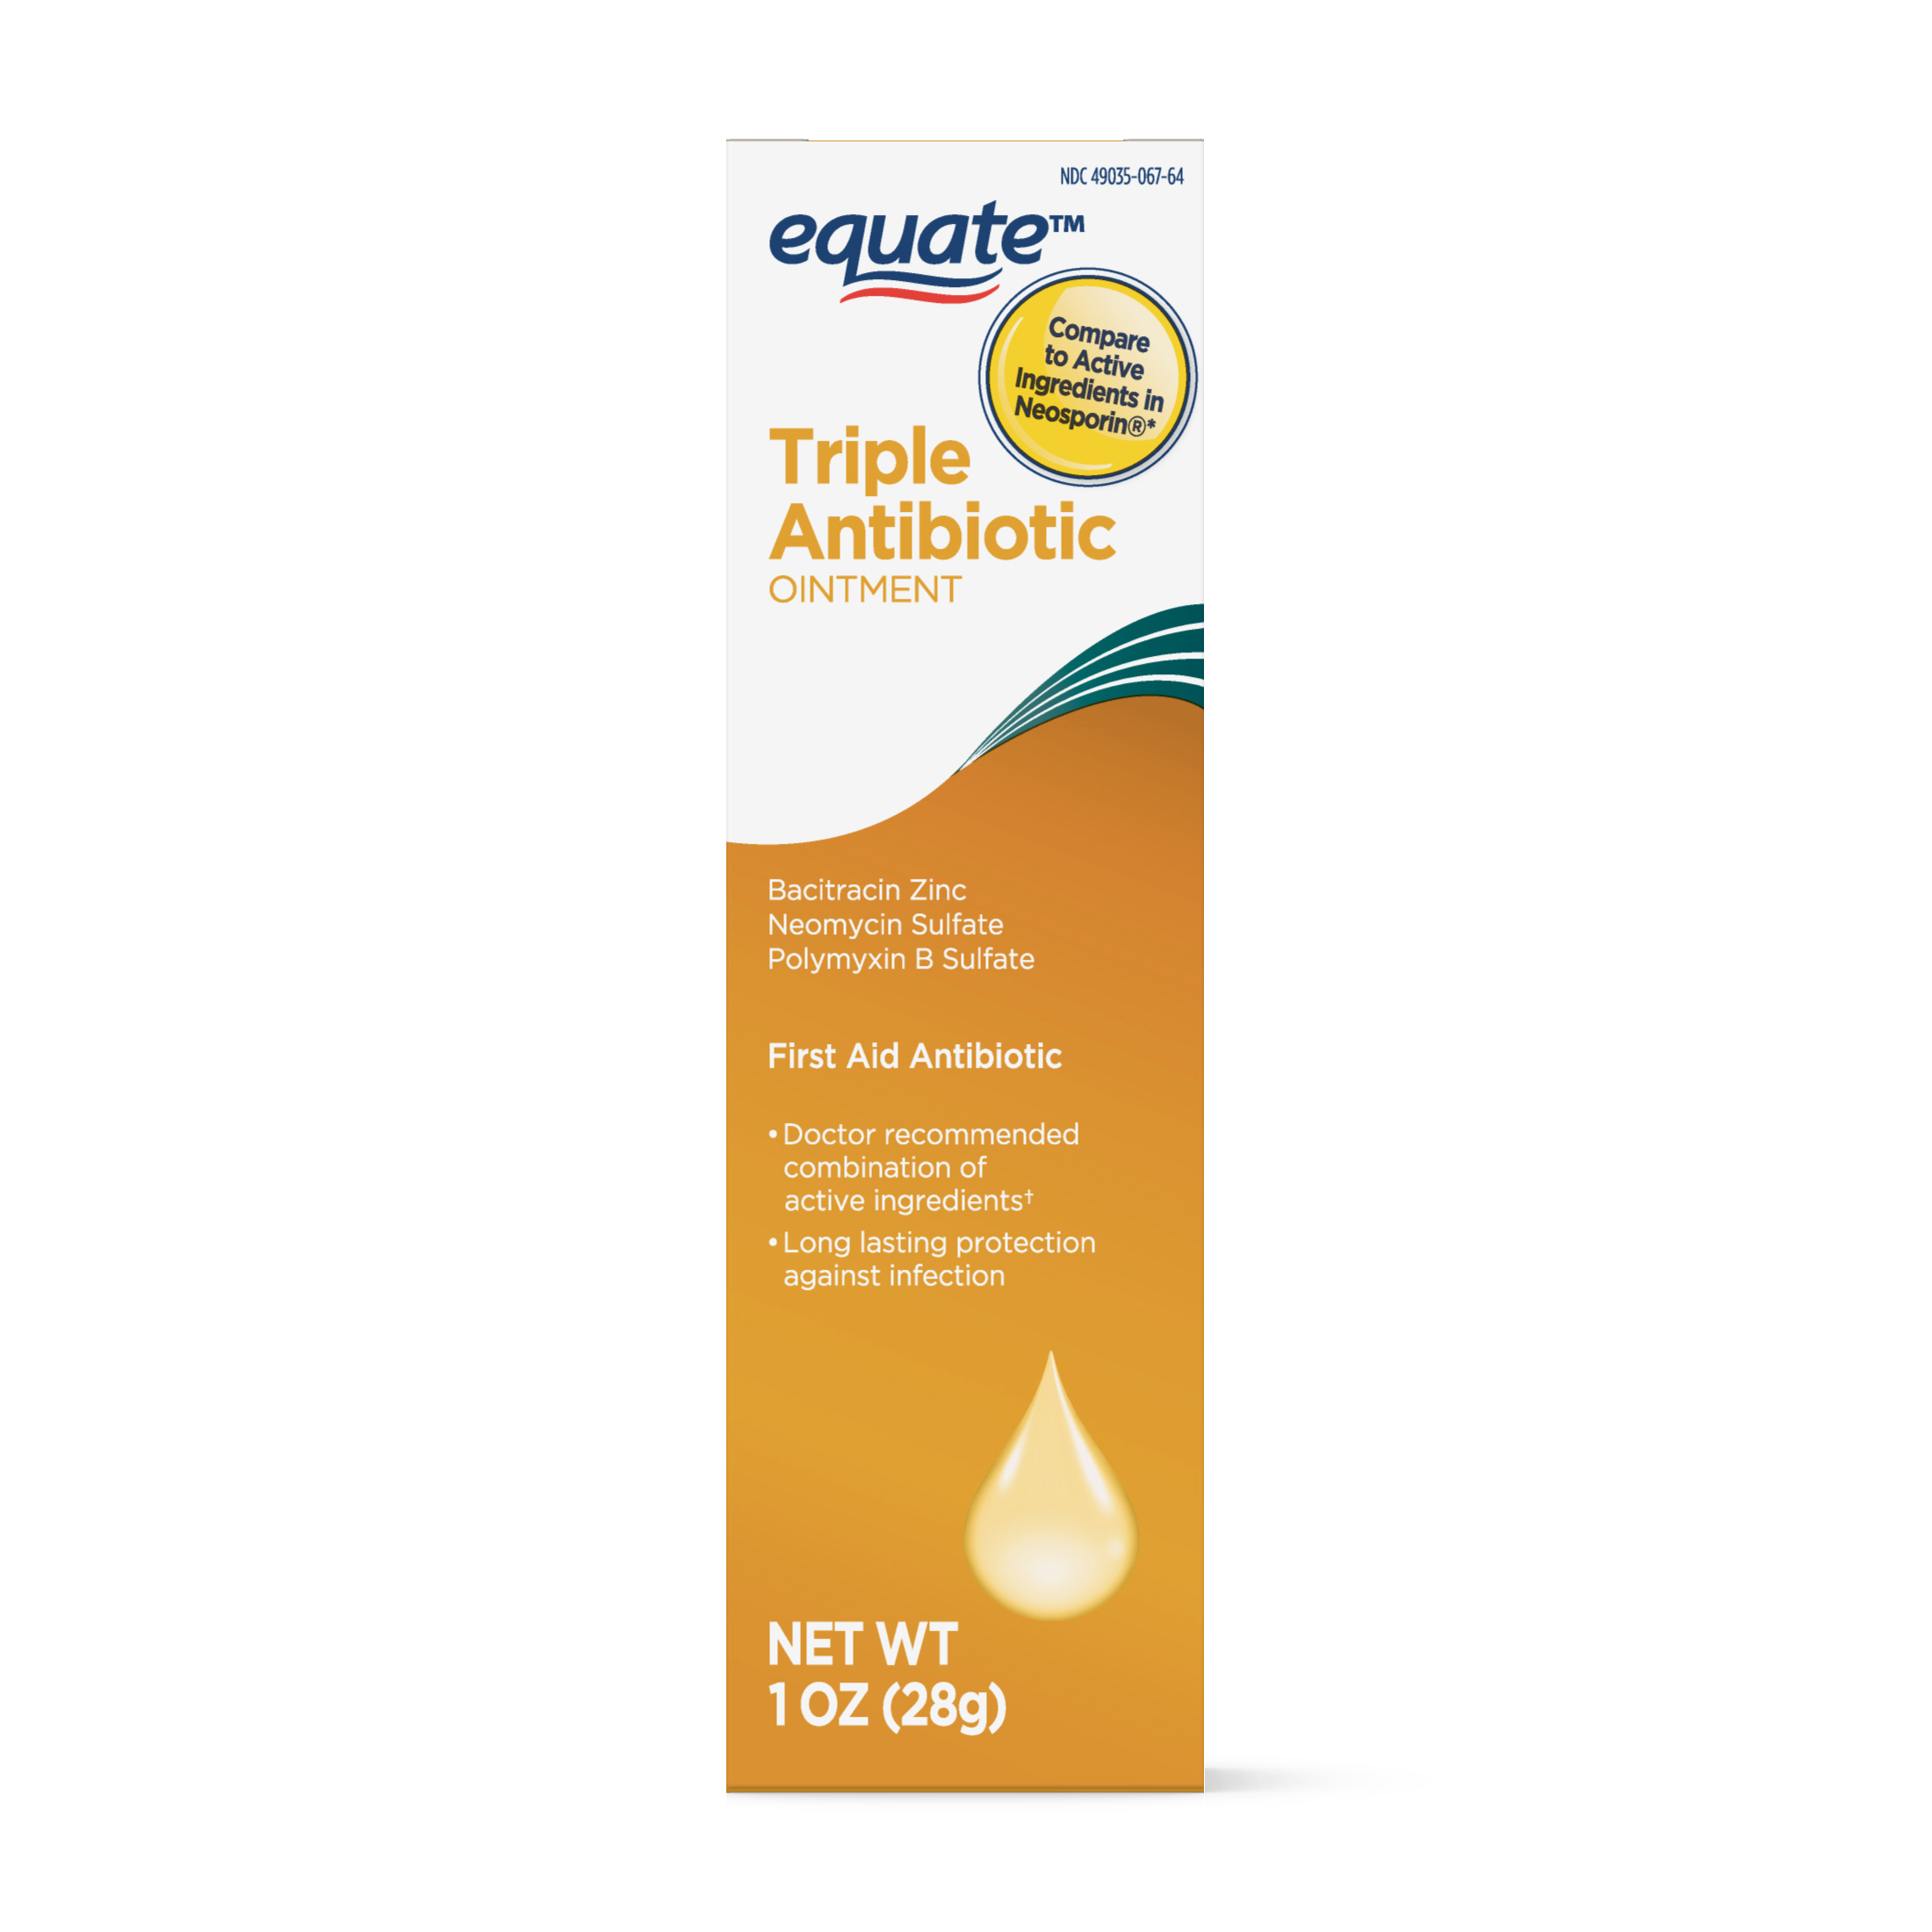 Equate First Aid Triple Antibiotic Ointment, 1 Ounce - image 1 of 7